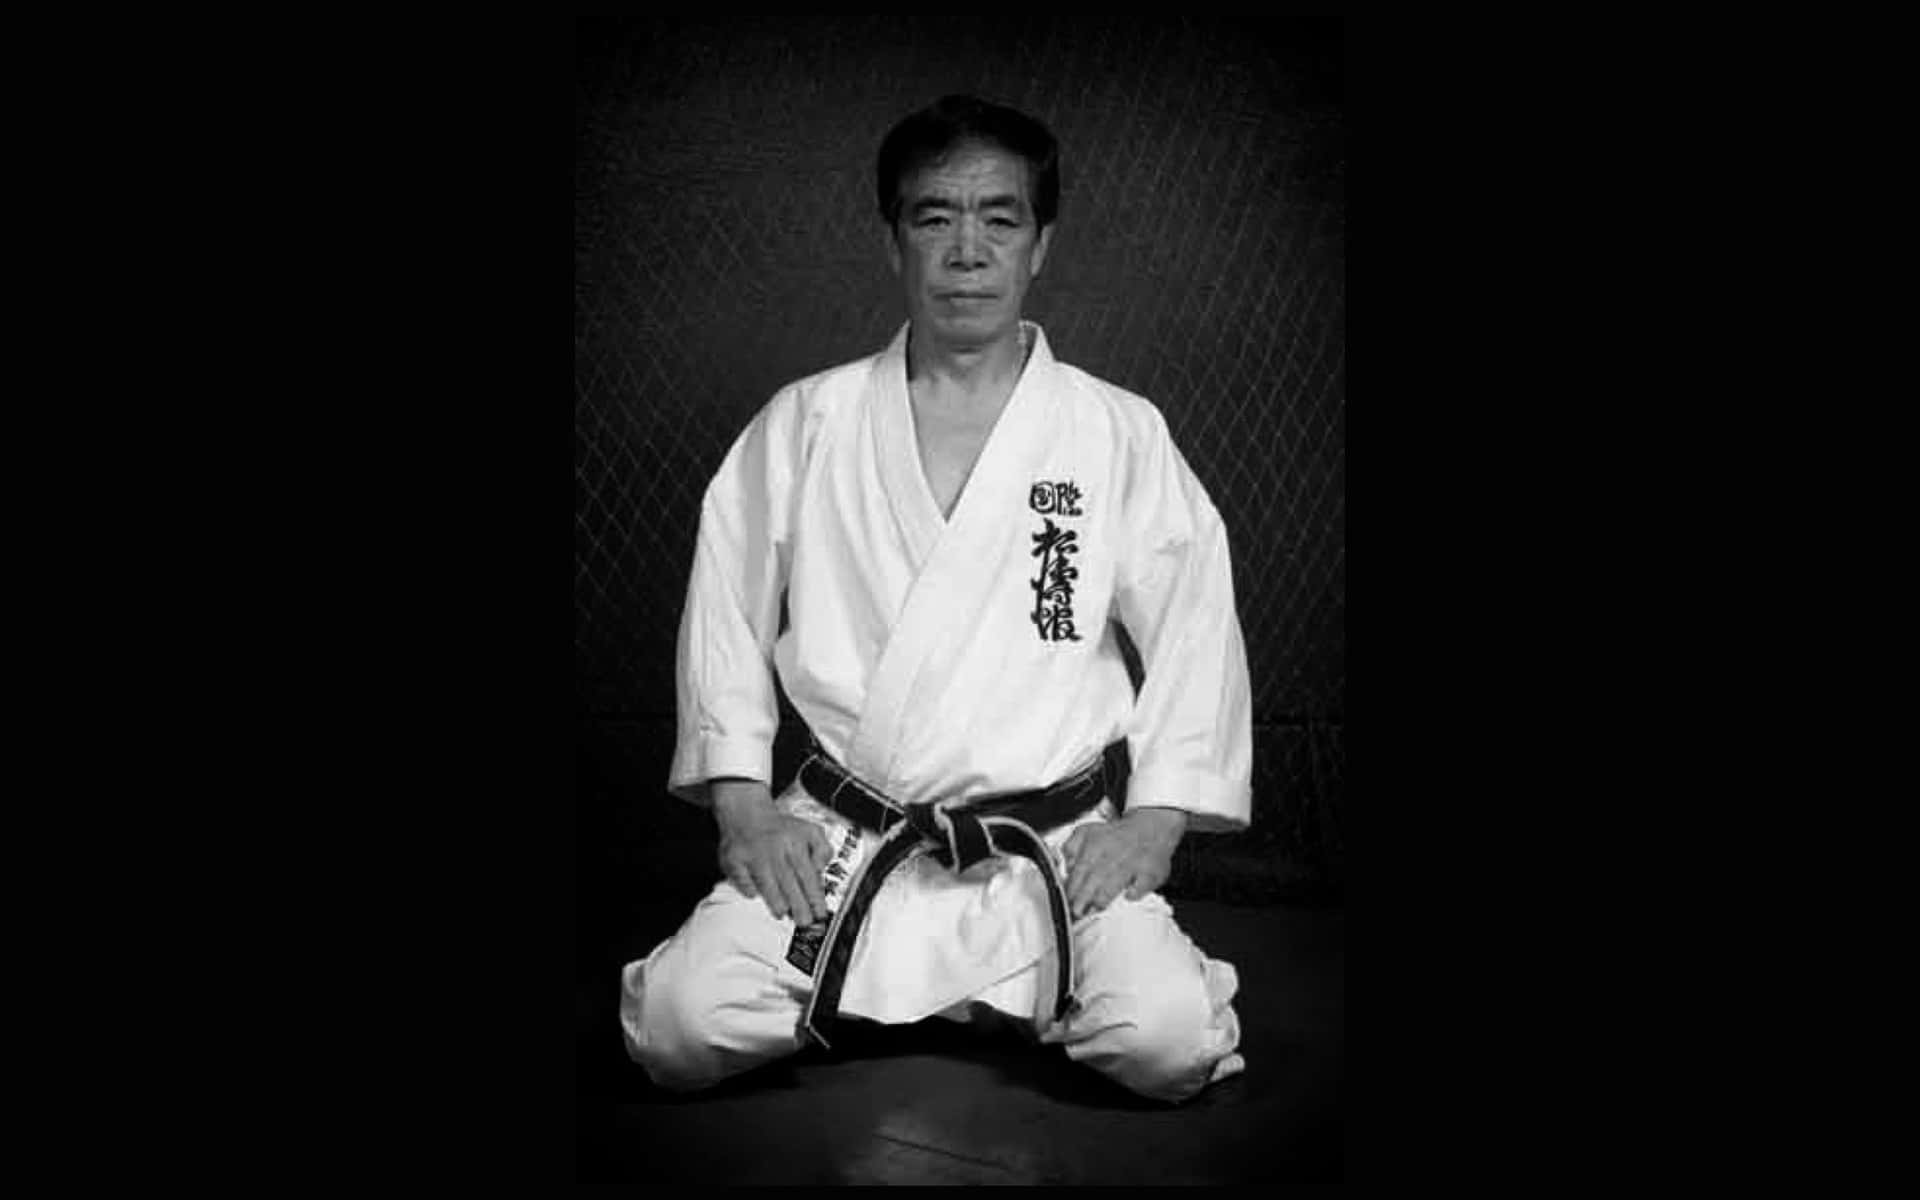 A Man In A Karate Uniform Sitting On The Ground